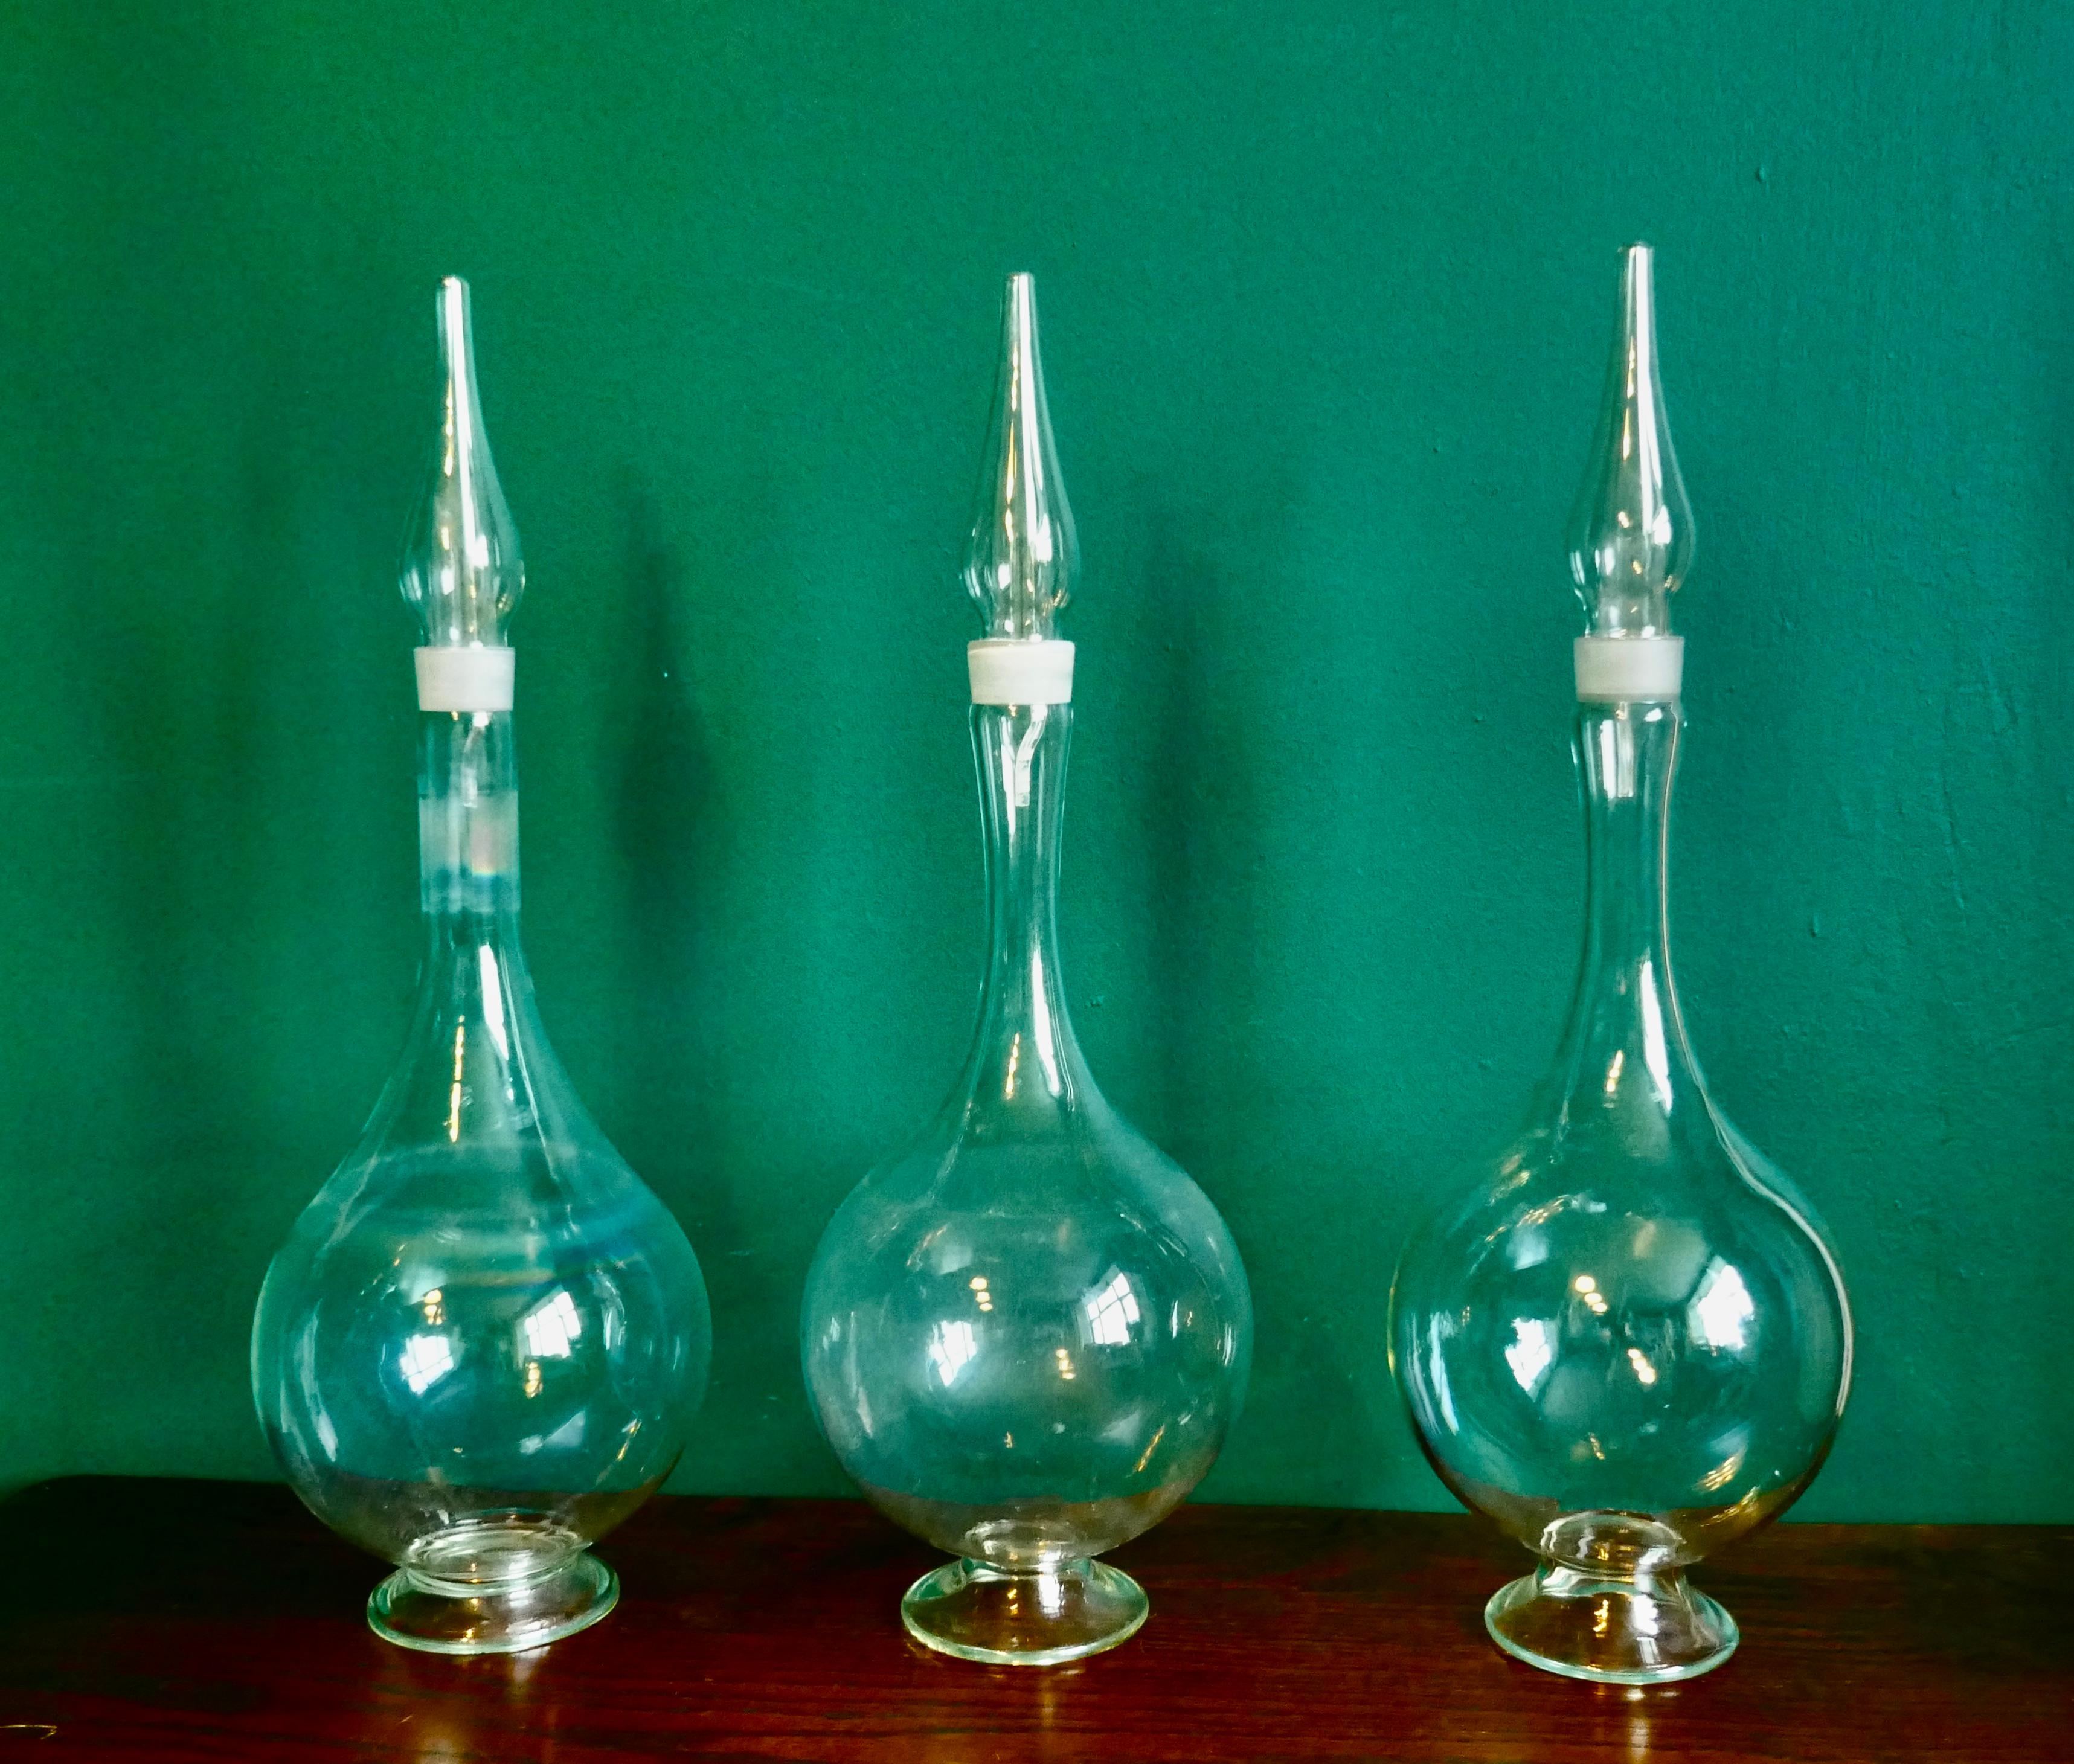 3 Very Large Antique Apothecary or Old Chemist Jars Shop Display  

These superb large jars are hand blown clear glass, they would have stood on a top shelf of the chemist shop
The jars have deep round bowls, a long neck and a pointed top